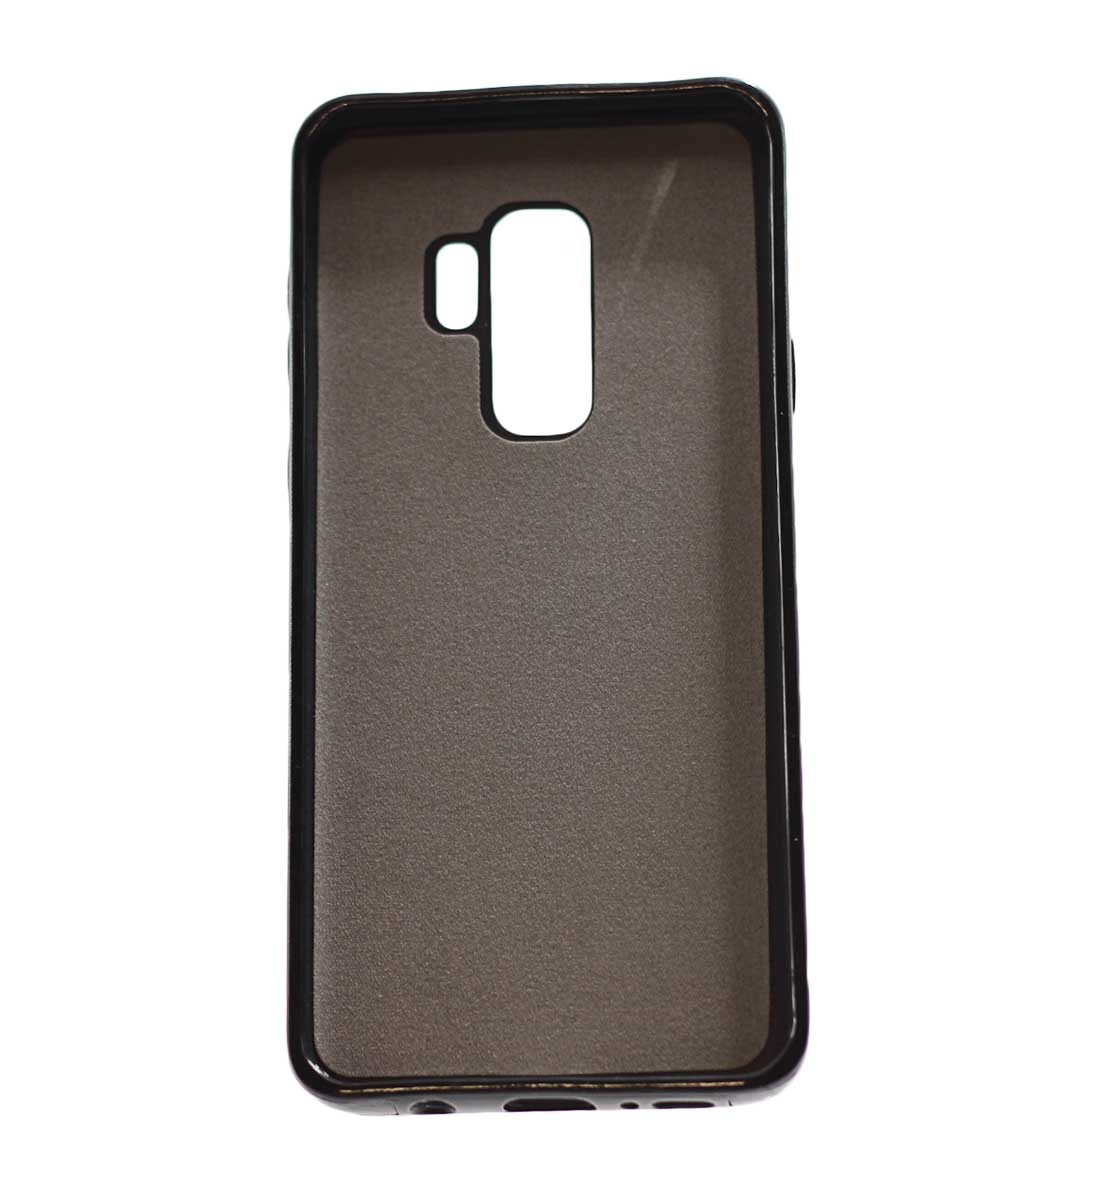 Samsung S9 Plus Leather Back Cover Black